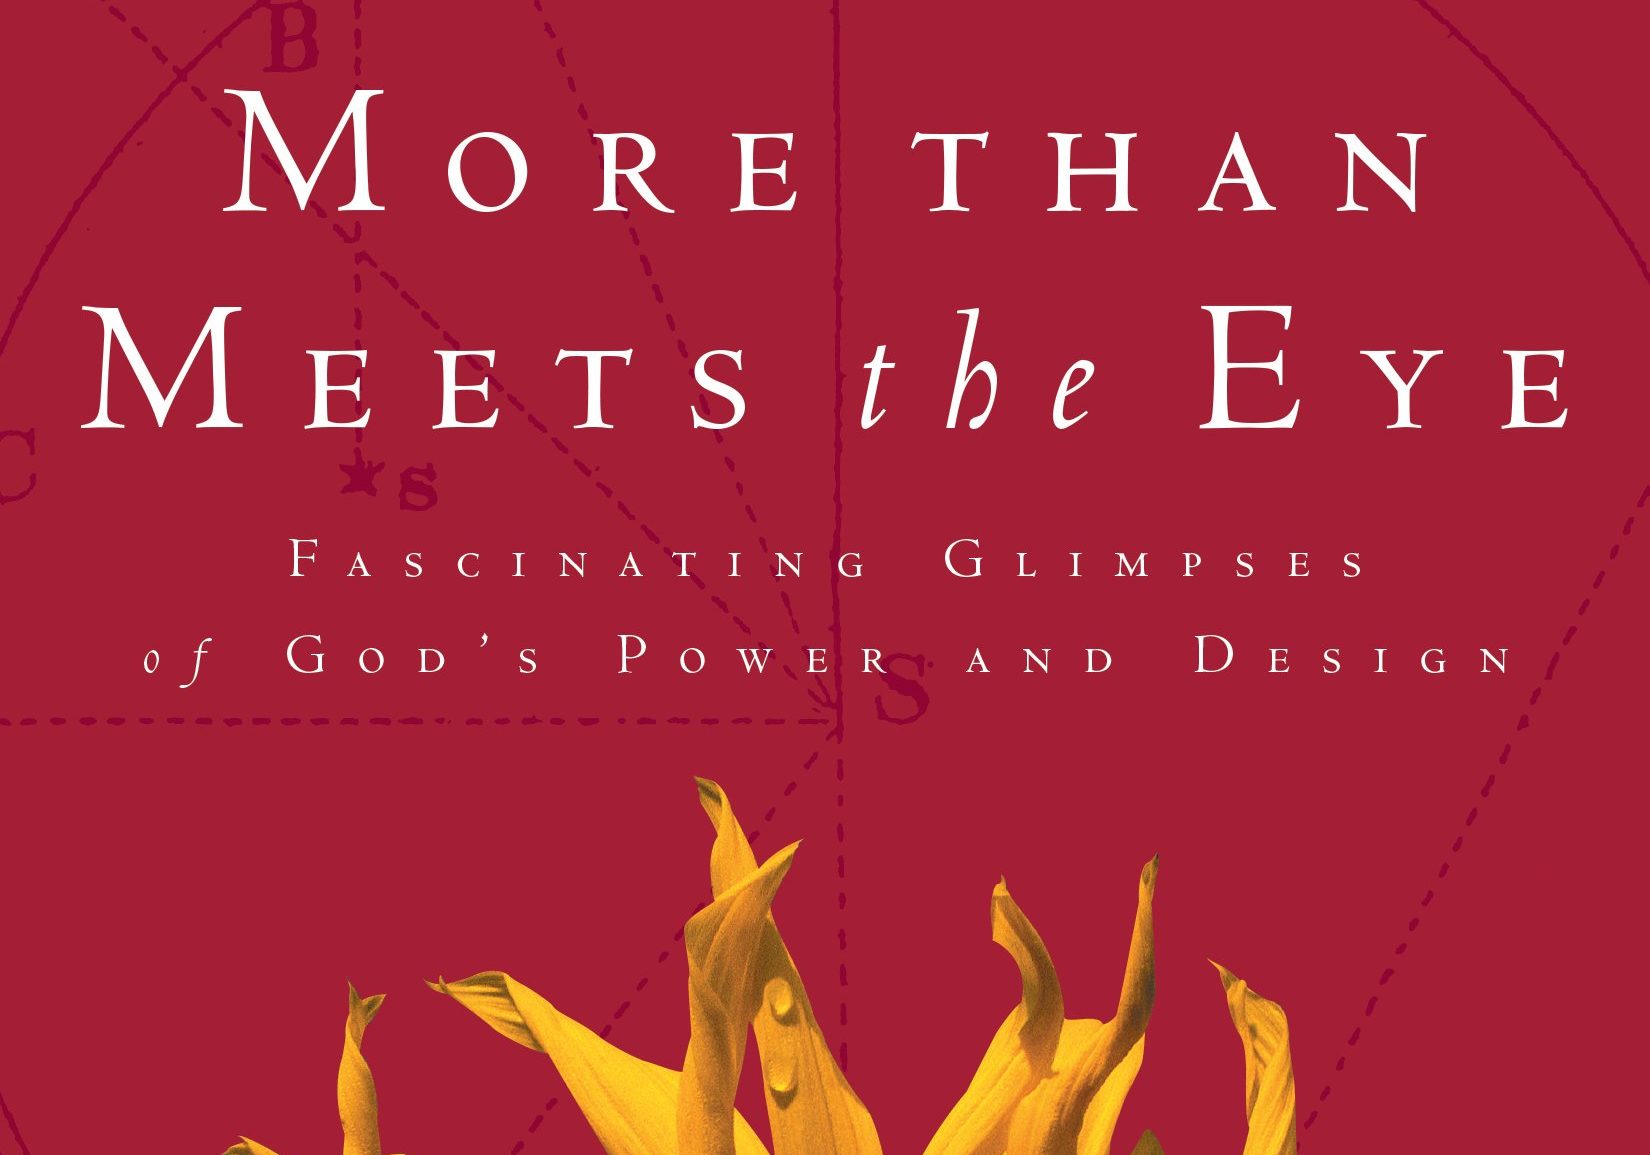 More Than Meets the Eye by Richard A Swenson, MD